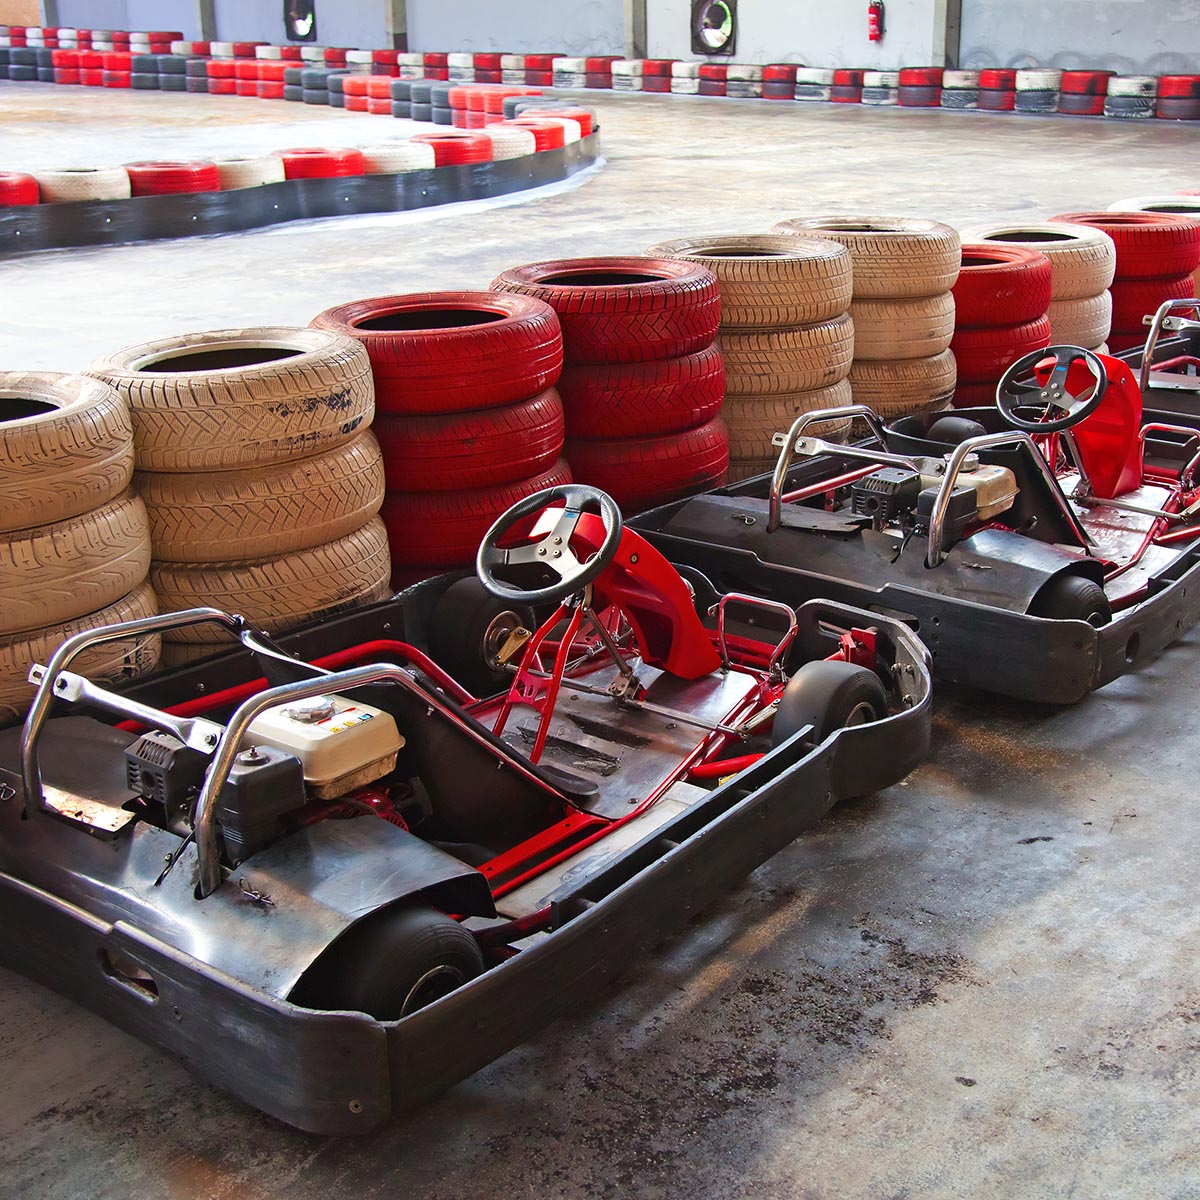 50 Lap Karting Race for Two